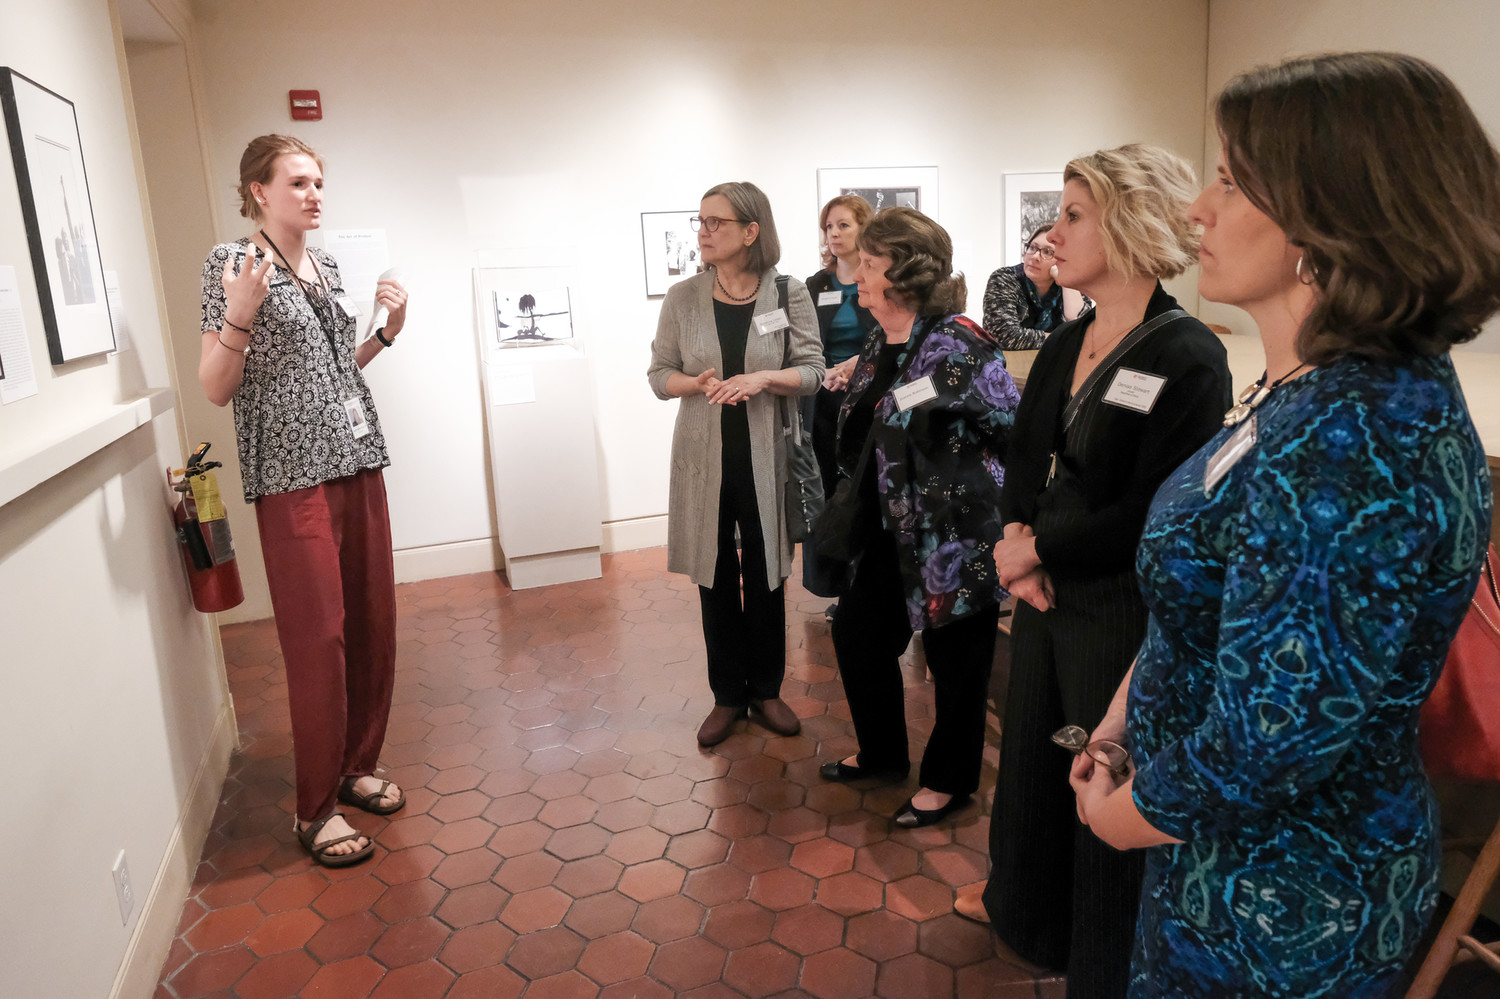 UVA Arts Council members and faculty enjoy a private tour with student docent Sarah Vanlandingham at The Fralin Museum of Art during the spring 2018 Arts Council meeting.